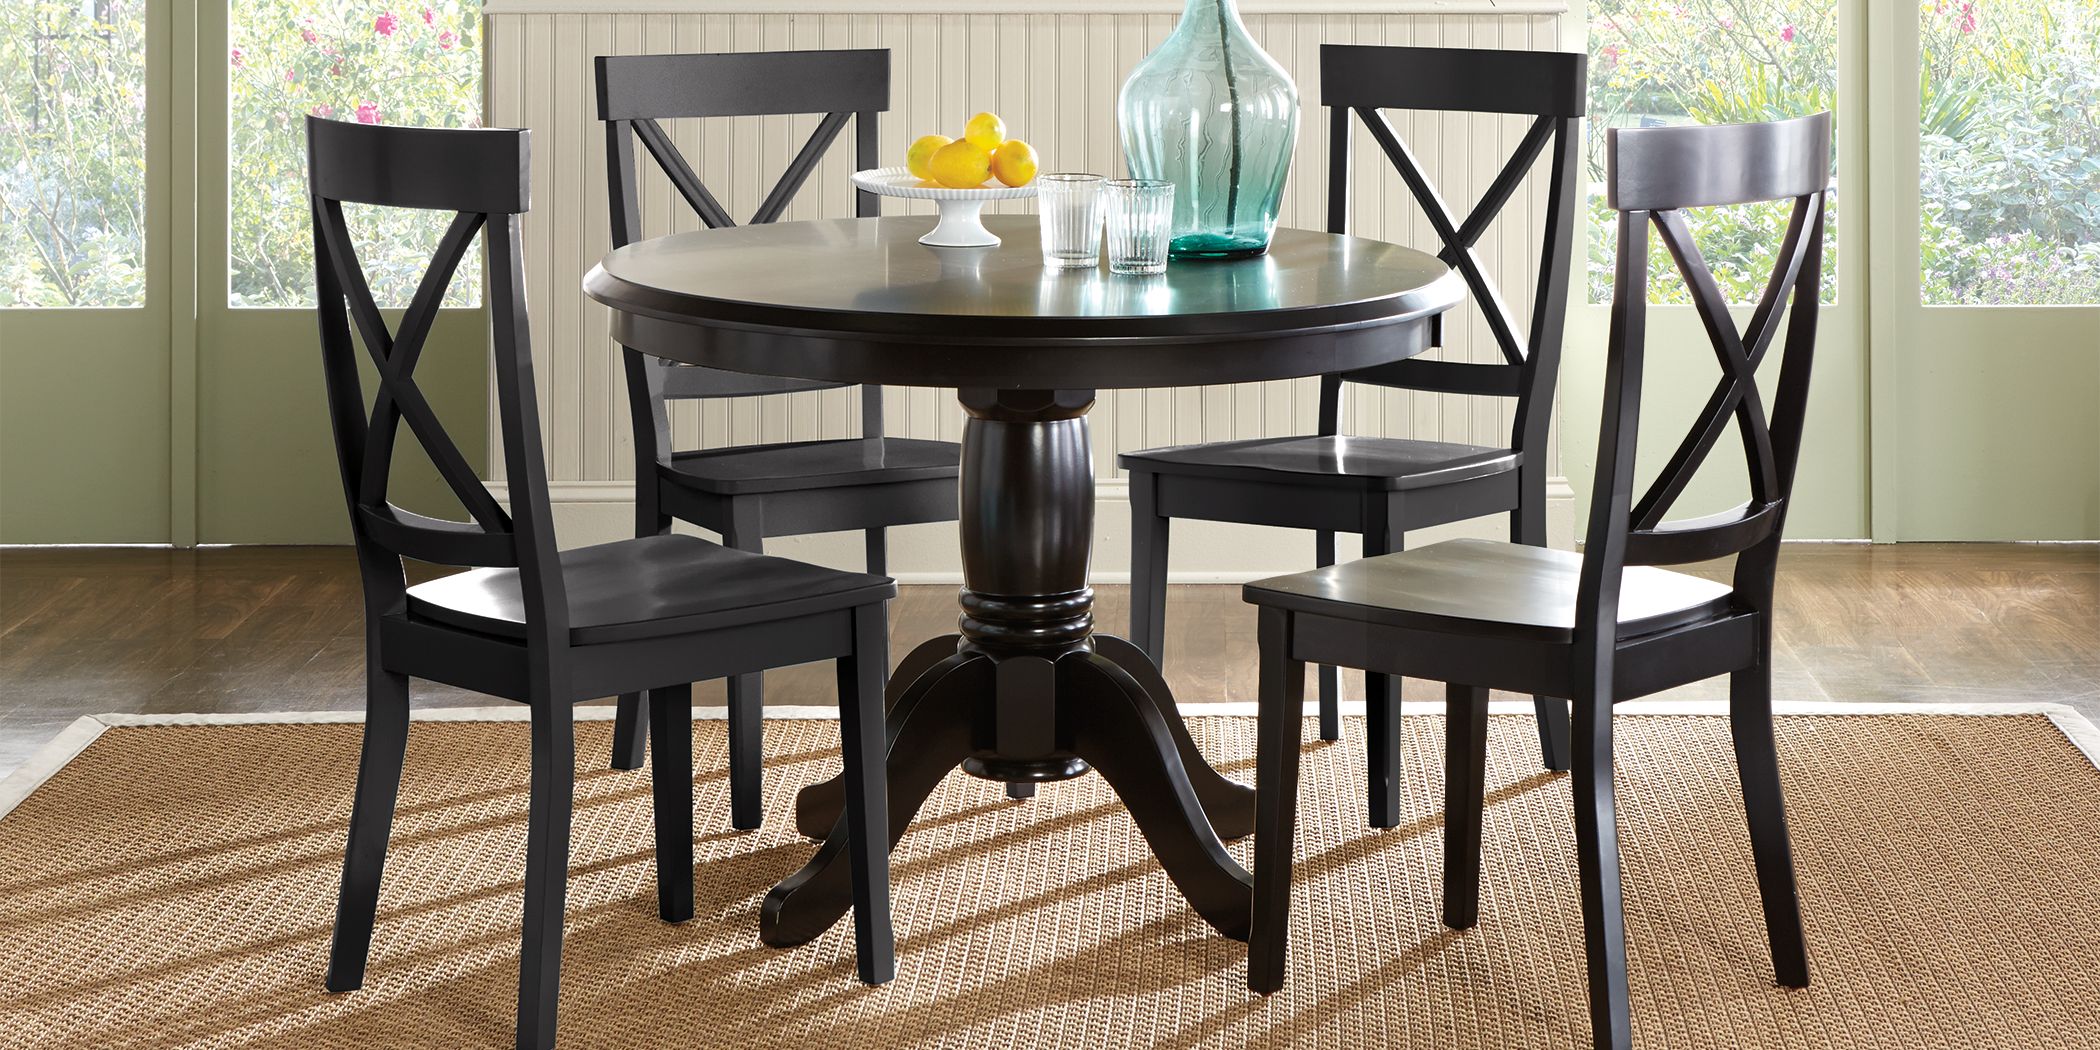 Dining Room Furniture Rooms, Rooms To Go Furniture Dining Room Sets